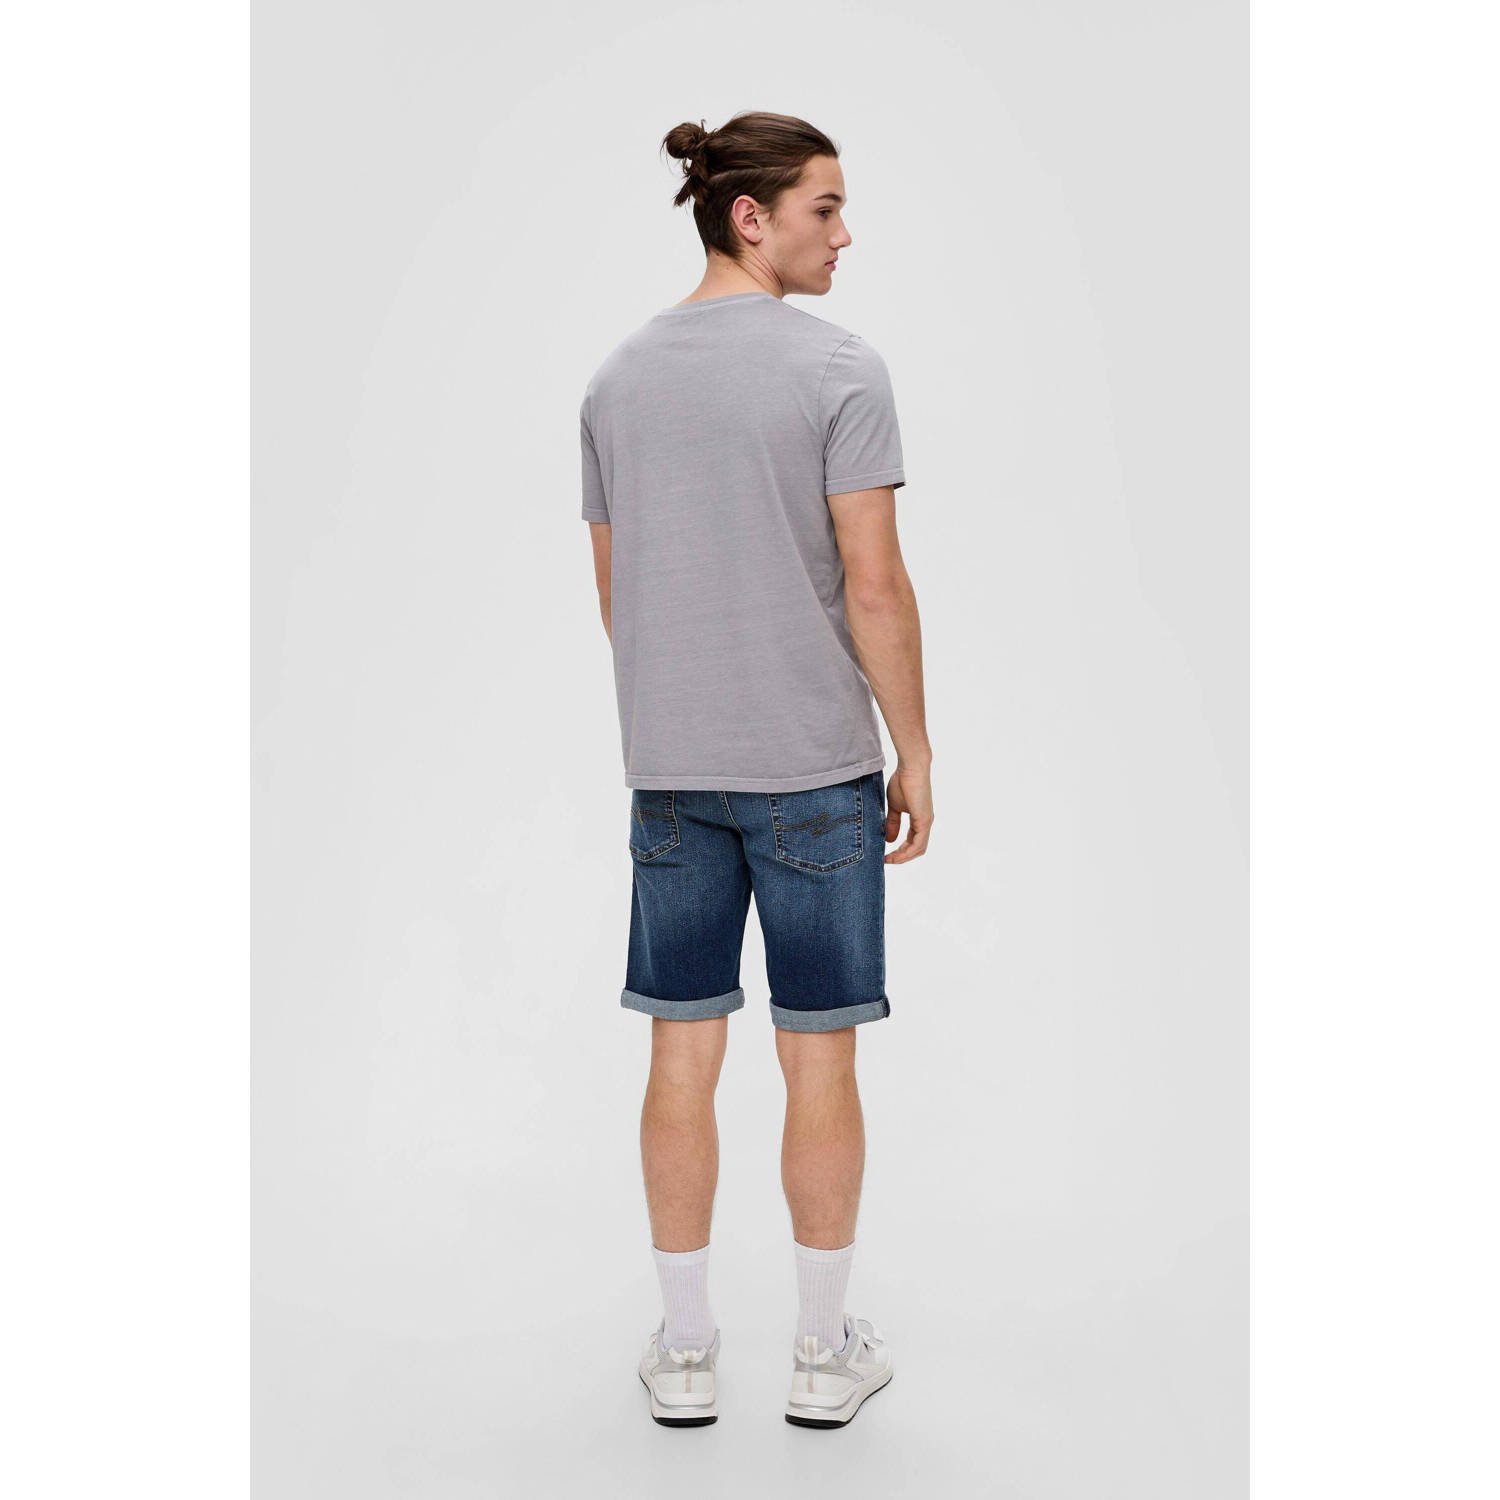 Q S by s.Oliver regular fit short donkerblauw